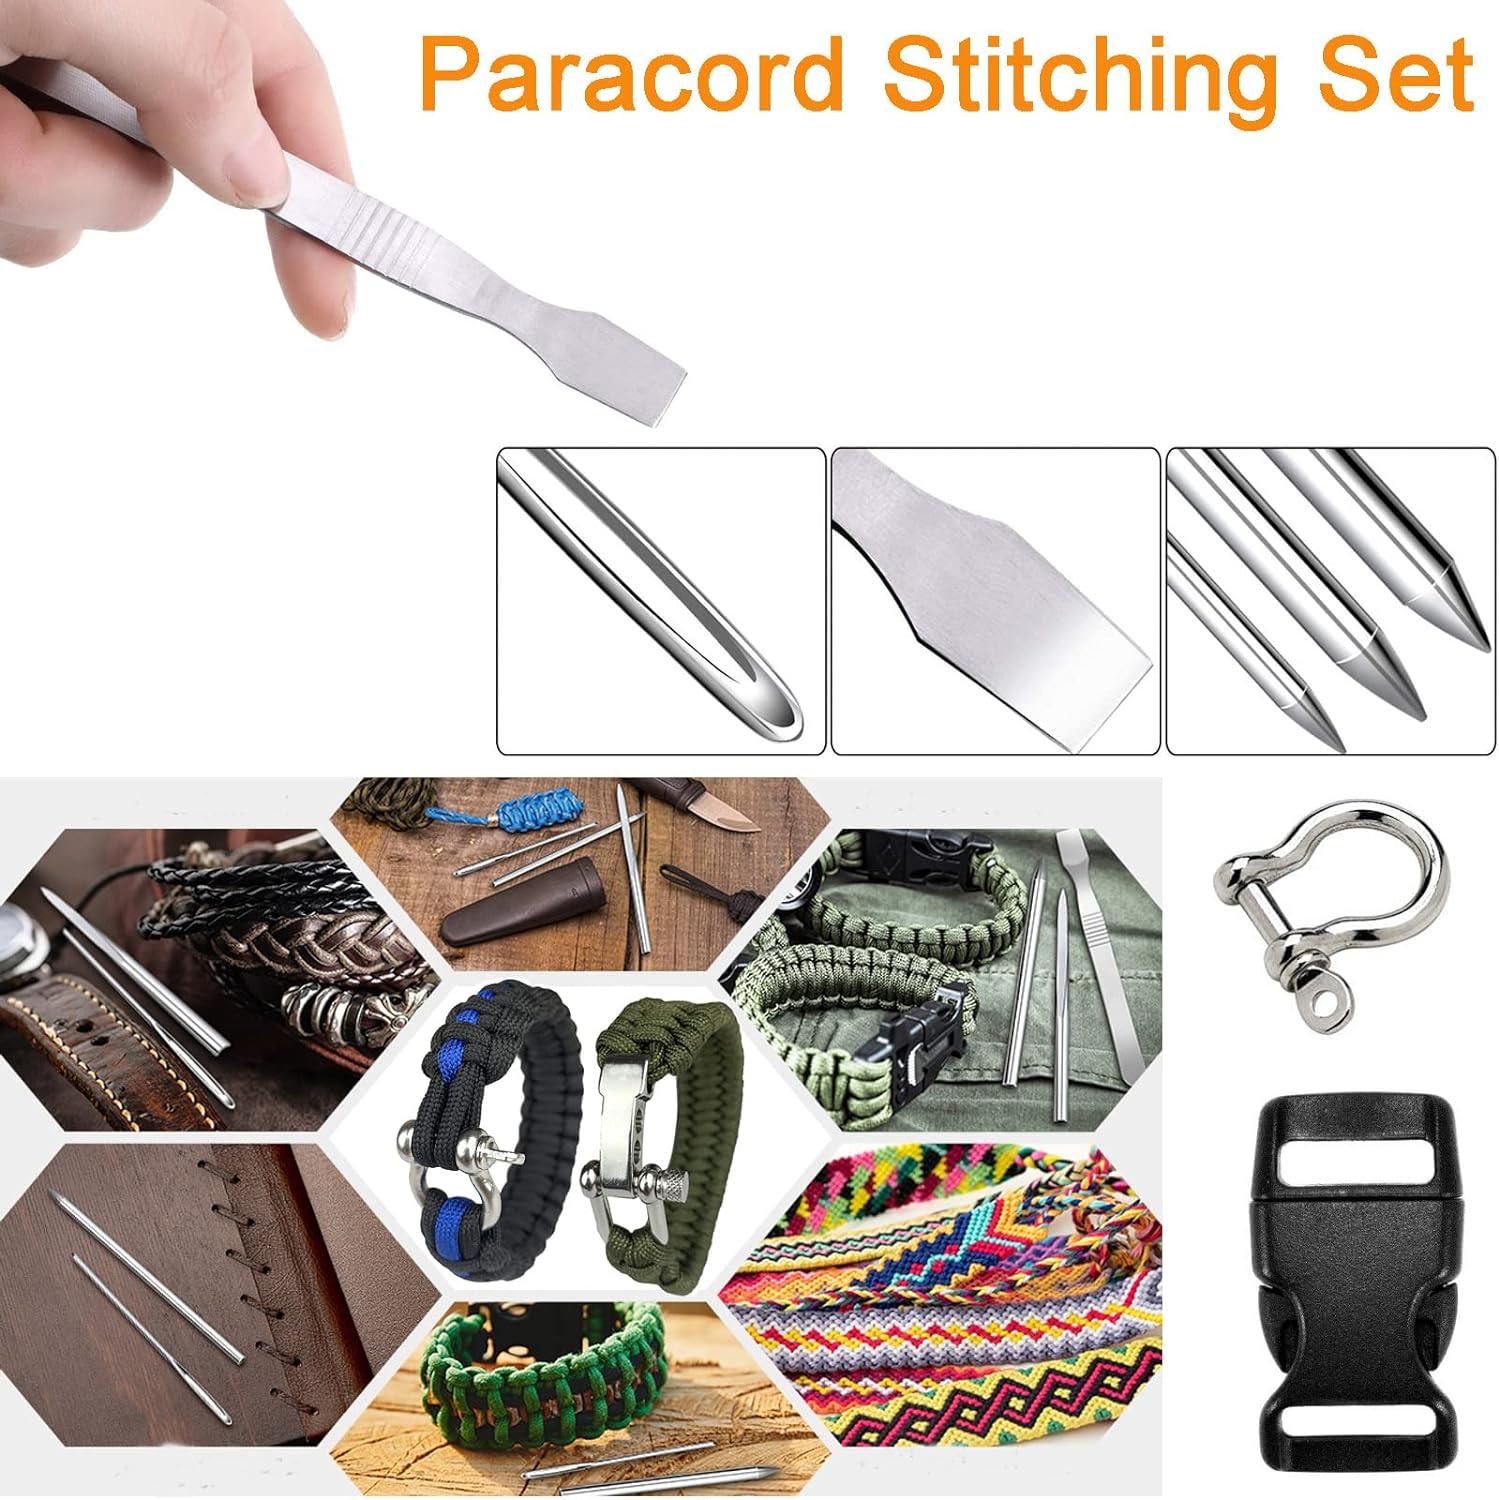 Etetevn 12 Pack Paracord Stitching Set 5 Sizes Paracord Needle with  Smoothing Bow Shackles Black Side Release Buckles Screw Pin Silver Black  hs-104 Lacing Stitching Needles